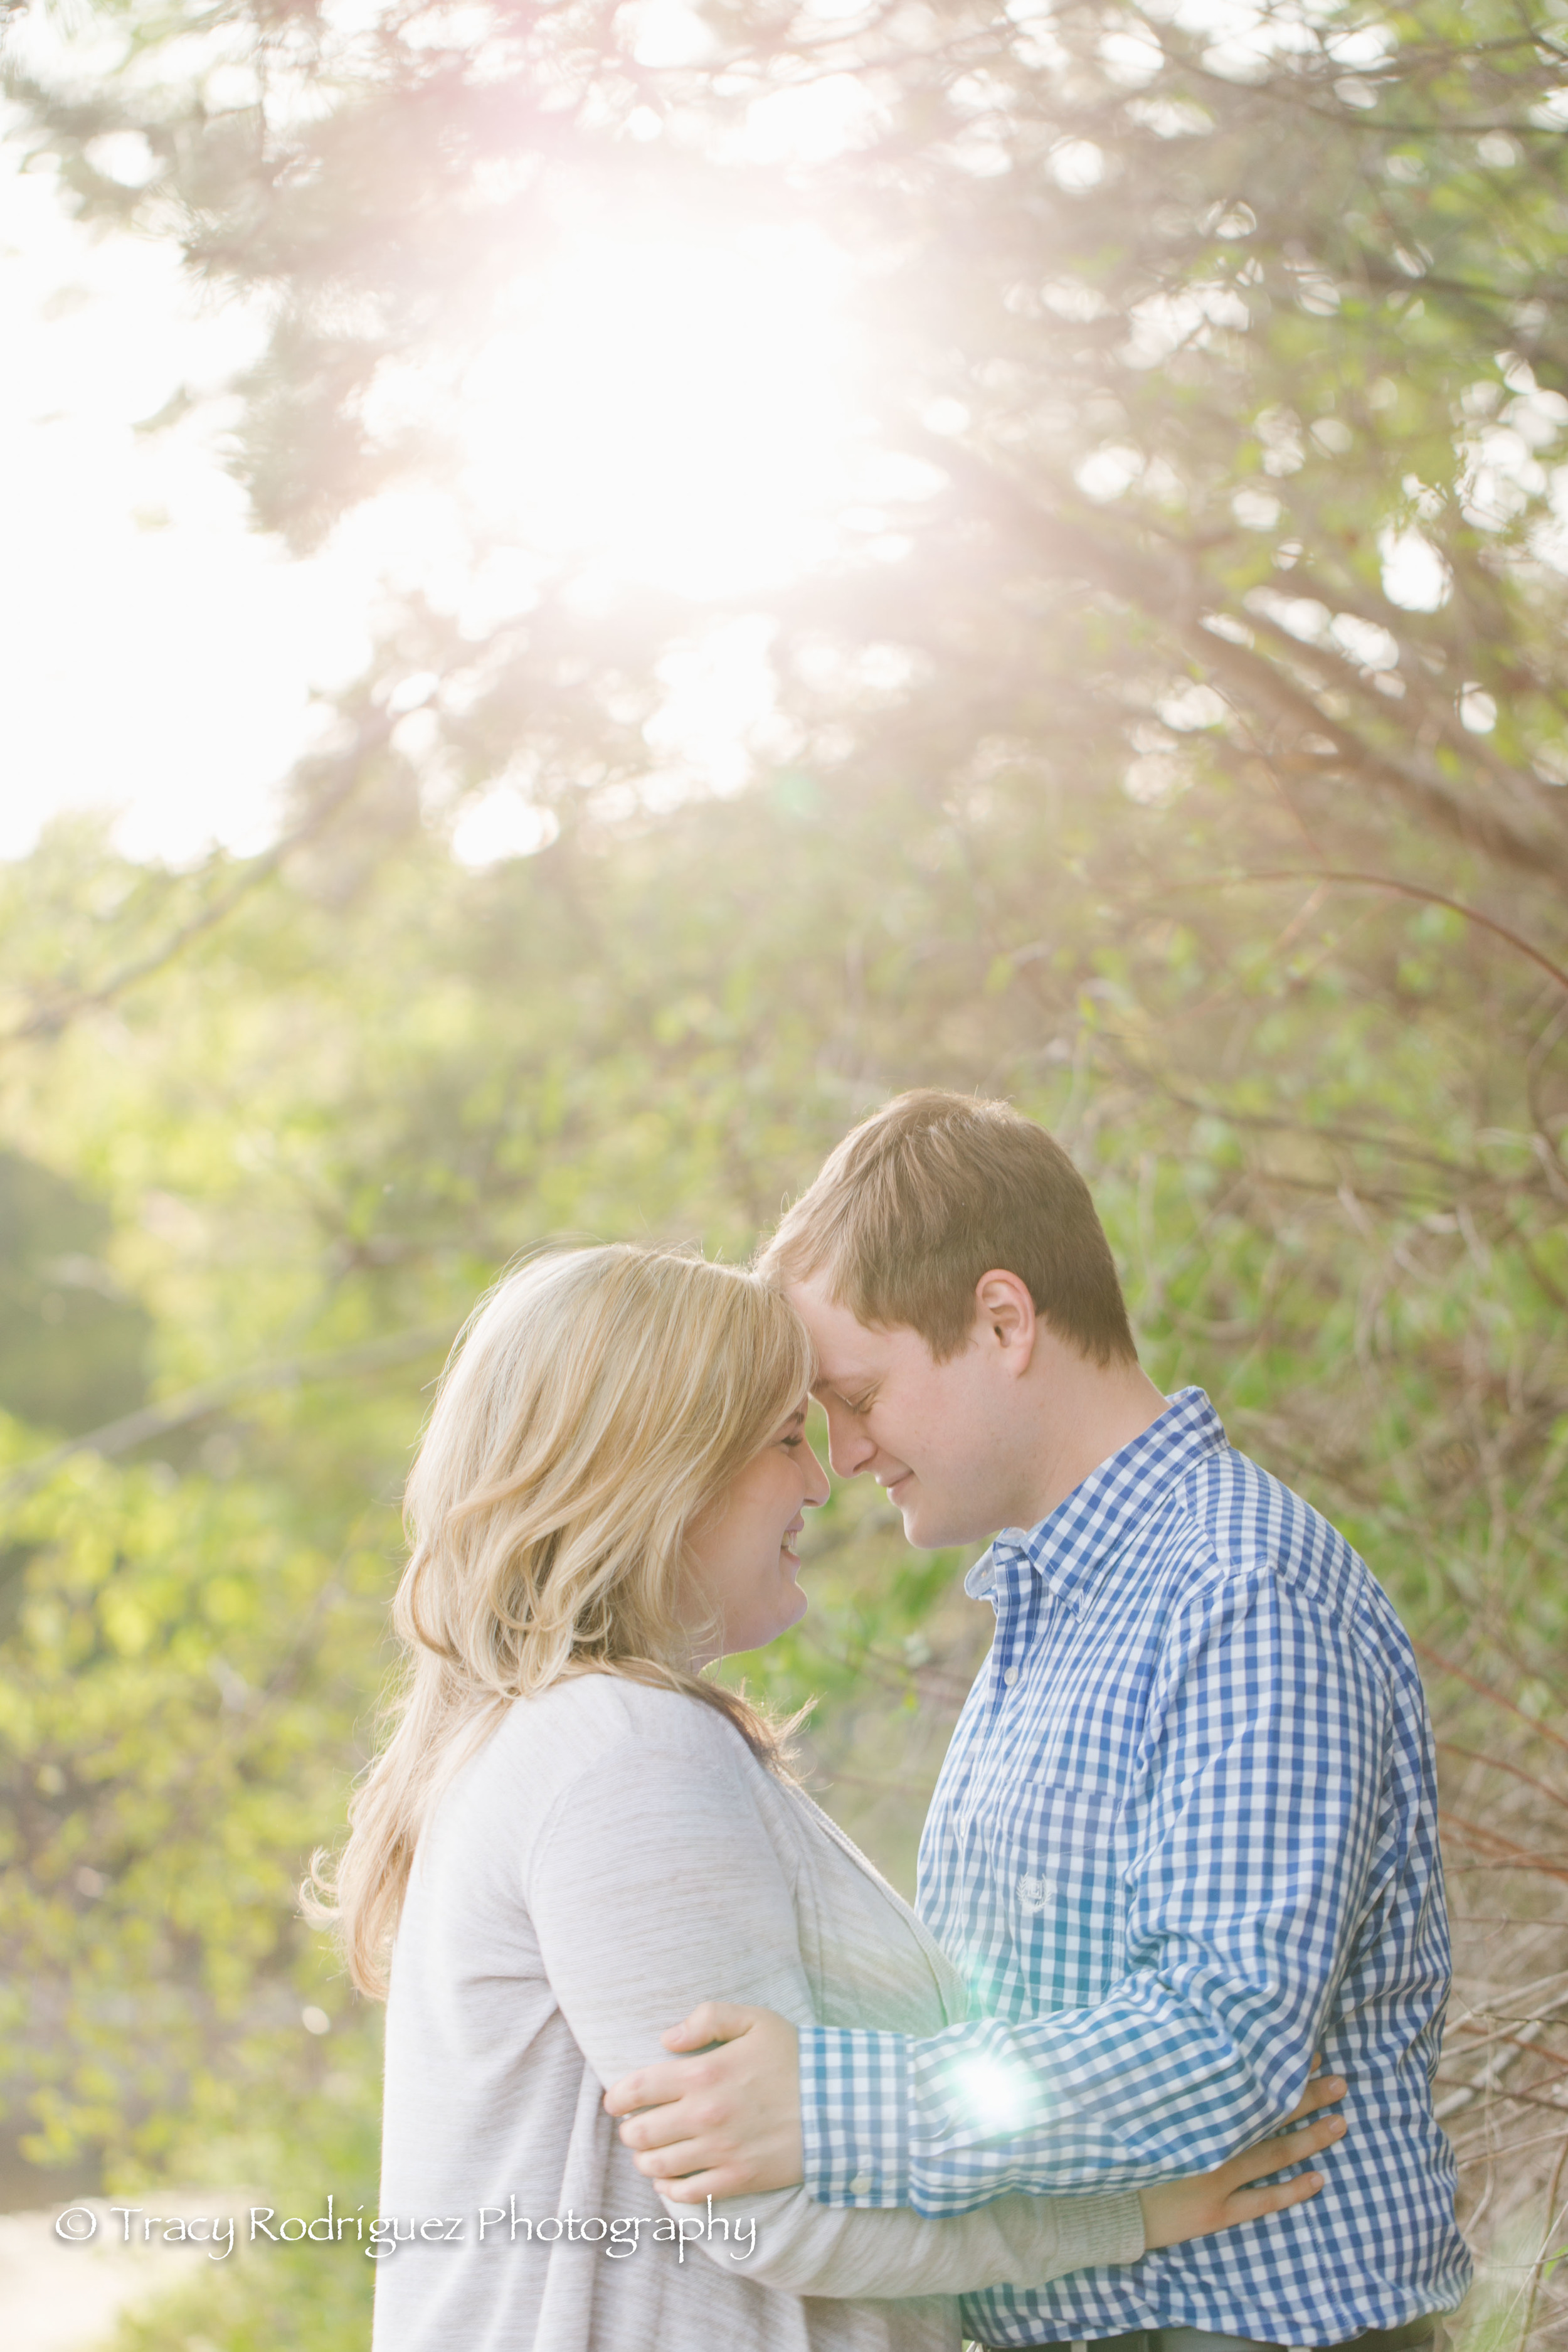 TracyRodriguezPhotography-Engagement-LowRes-38.jpg